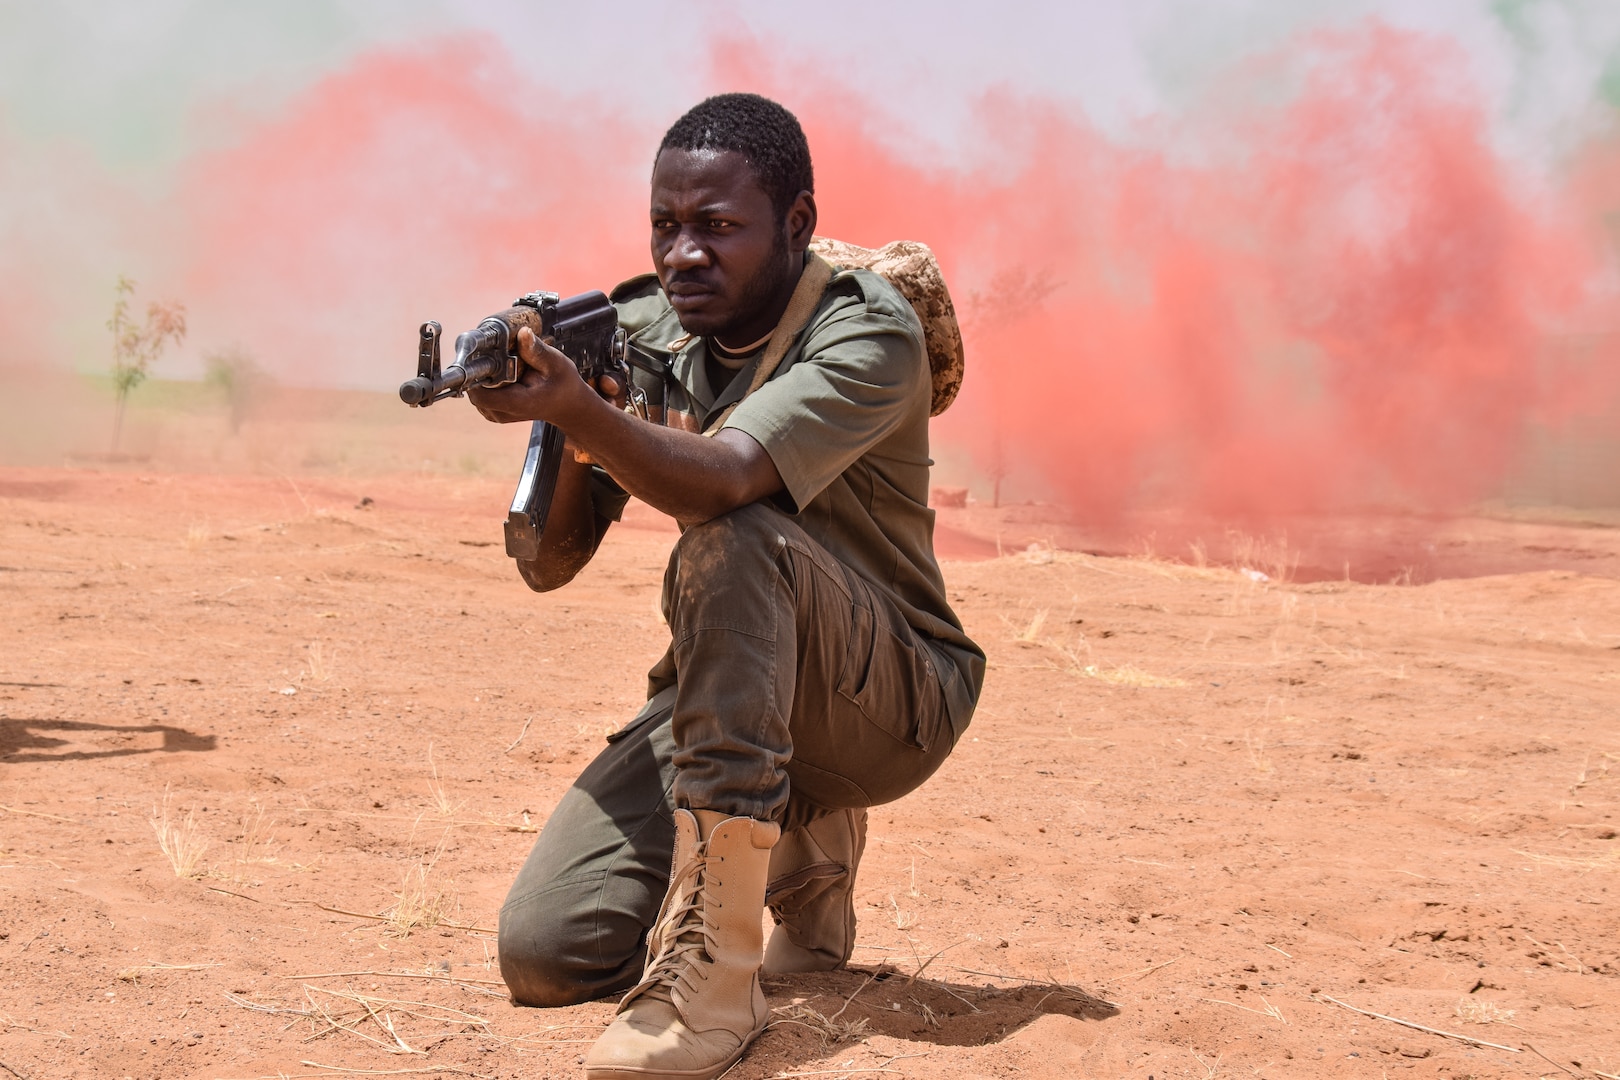 Forces Armées Nigeriennes soldier watches his sector in training mission during Flintlock 2018 exercise, at Agadez, Niger, April 17, 2018 (U.S. Army/Mary S. Katzenberger)